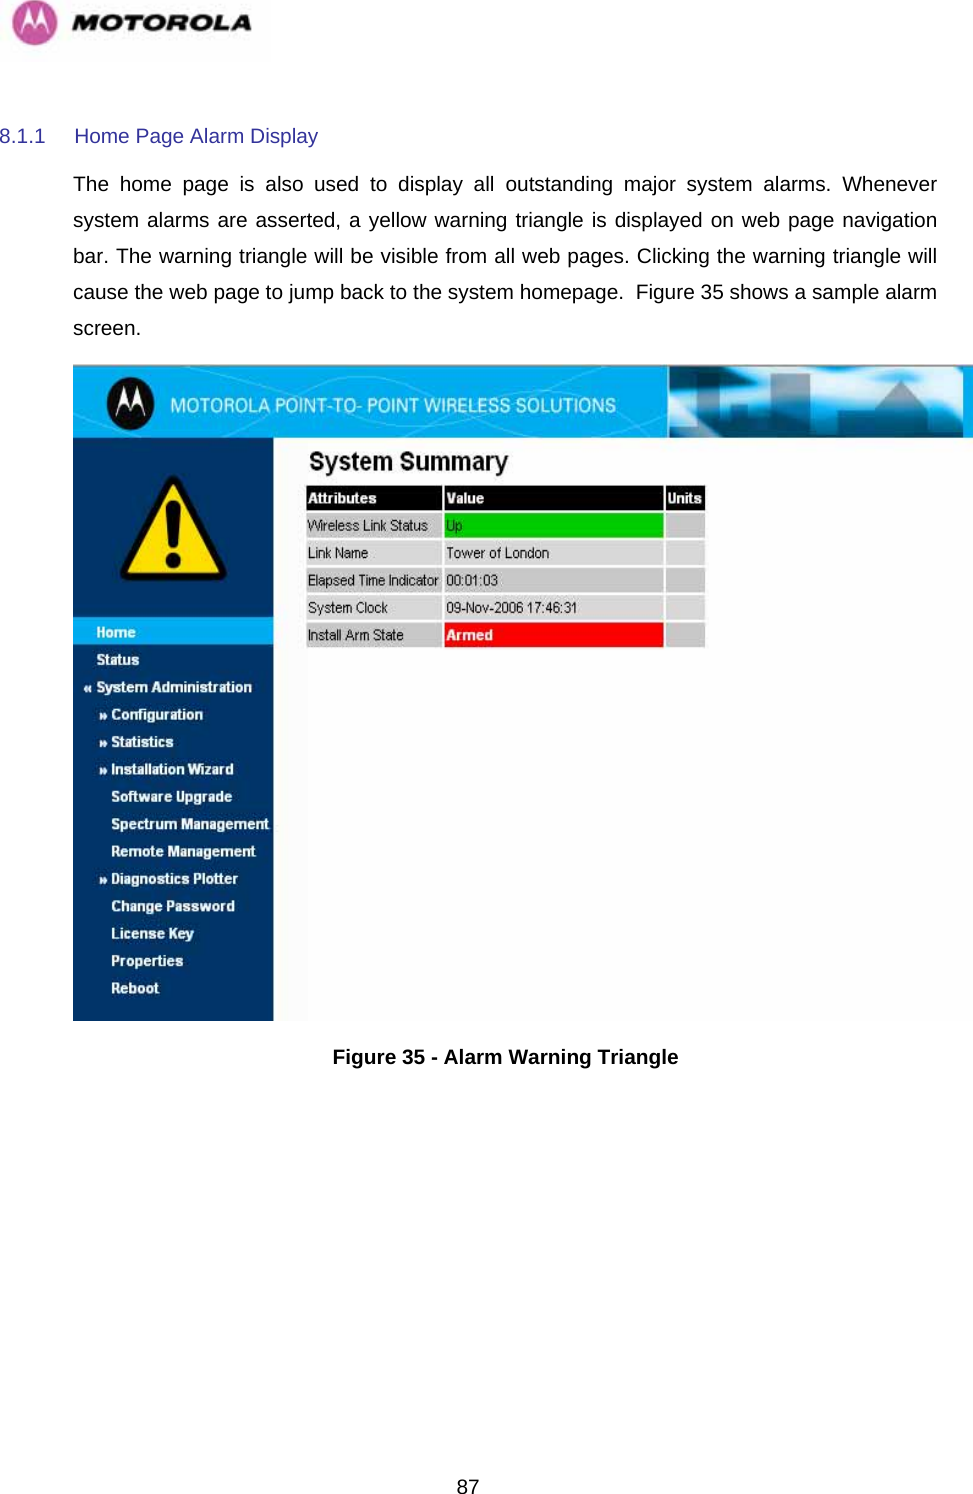   878.1.1  Home Page Alarm Display The home page is also used to display all outstanding major system alarms. Whenever system alarms are asserted, a yellow warning triangle is displayed on web page navigation bar. The warning triangle will be visible from all web pages. Clicking the warning triangle will cause the web page to jump back to the system homepage.  Figure 35 shows a sample alarm screen.  Figure 35 - Alarm Warning Triangle  